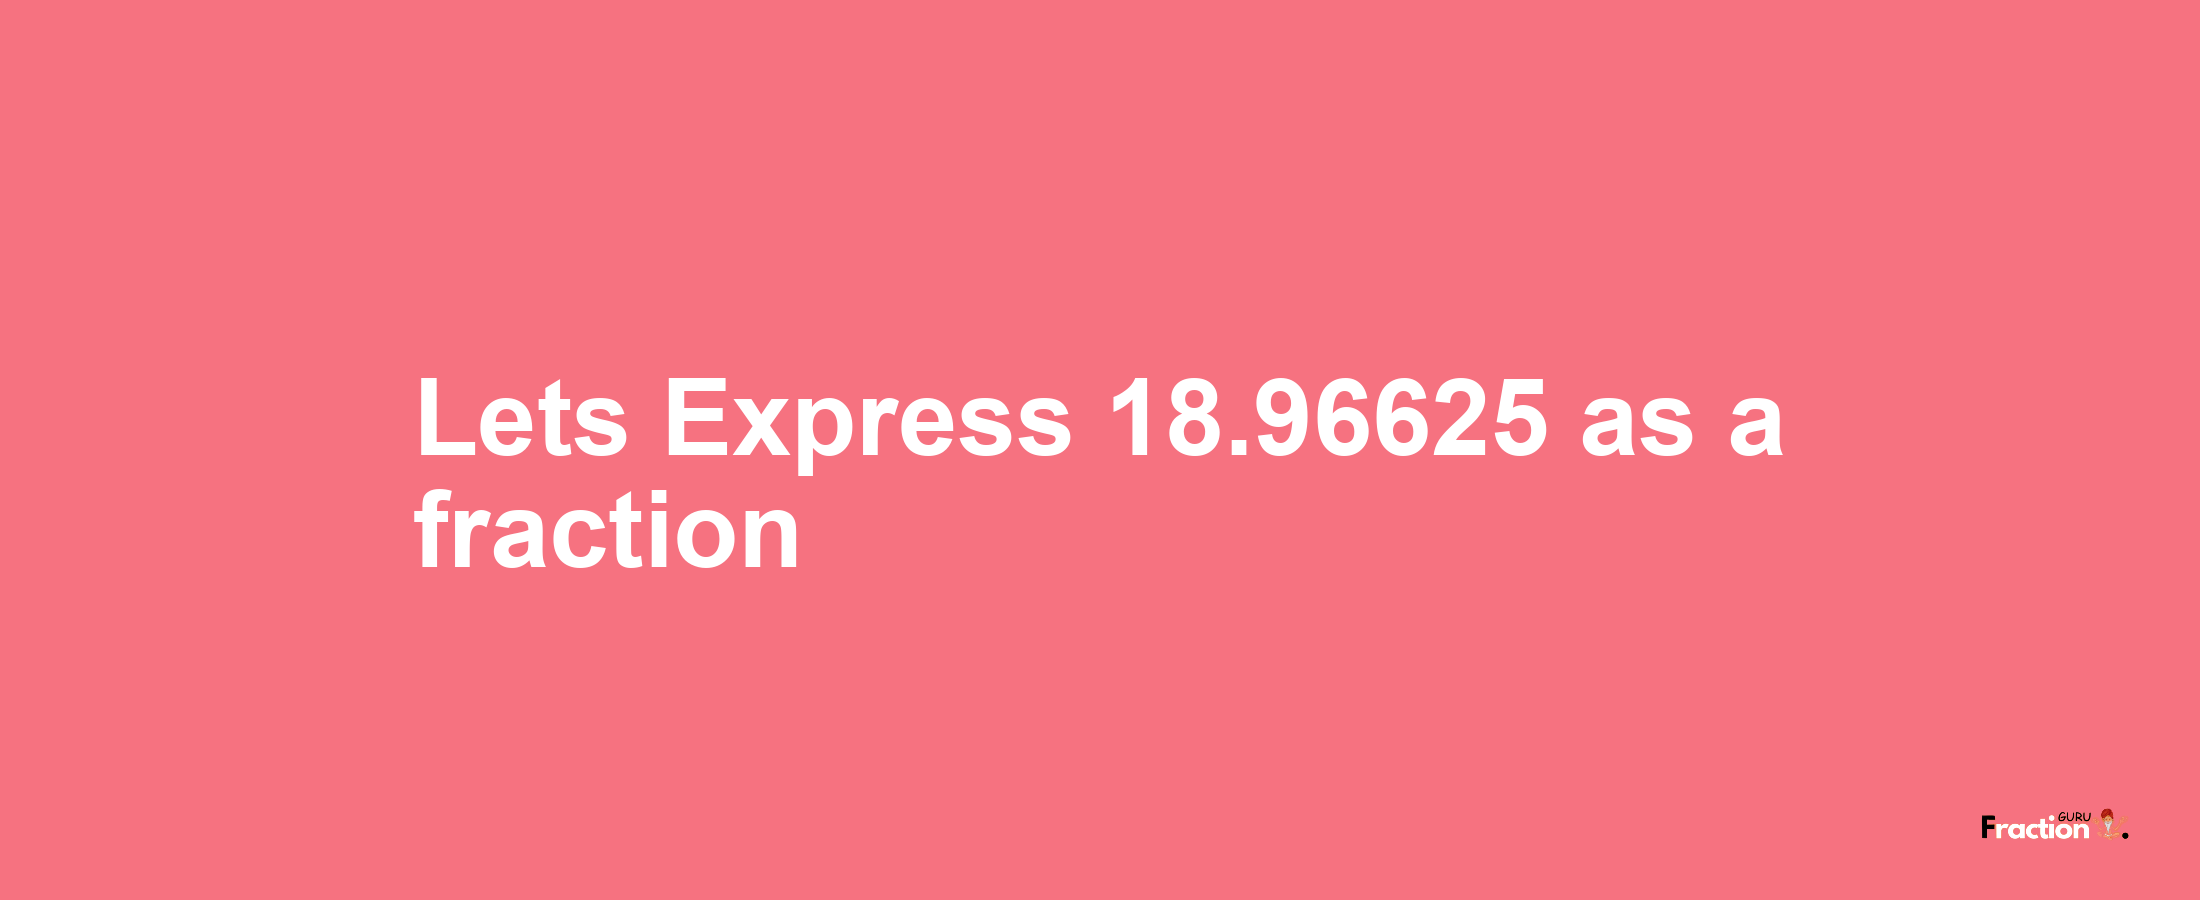 Lets Express 18.96625 as afraction